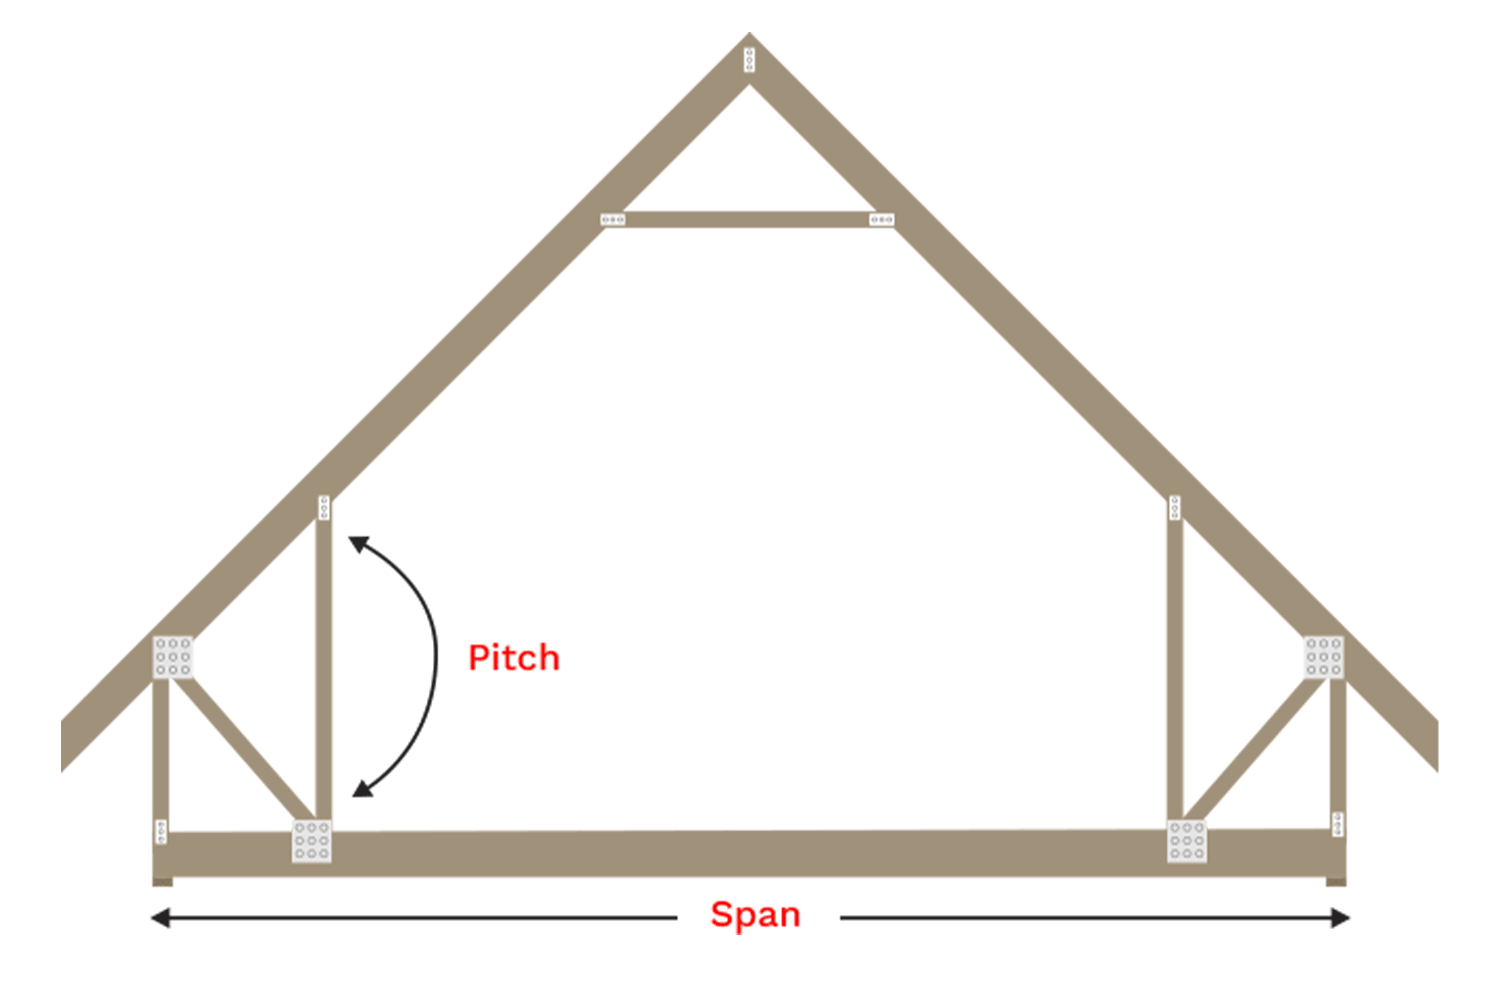 35mm truss example image